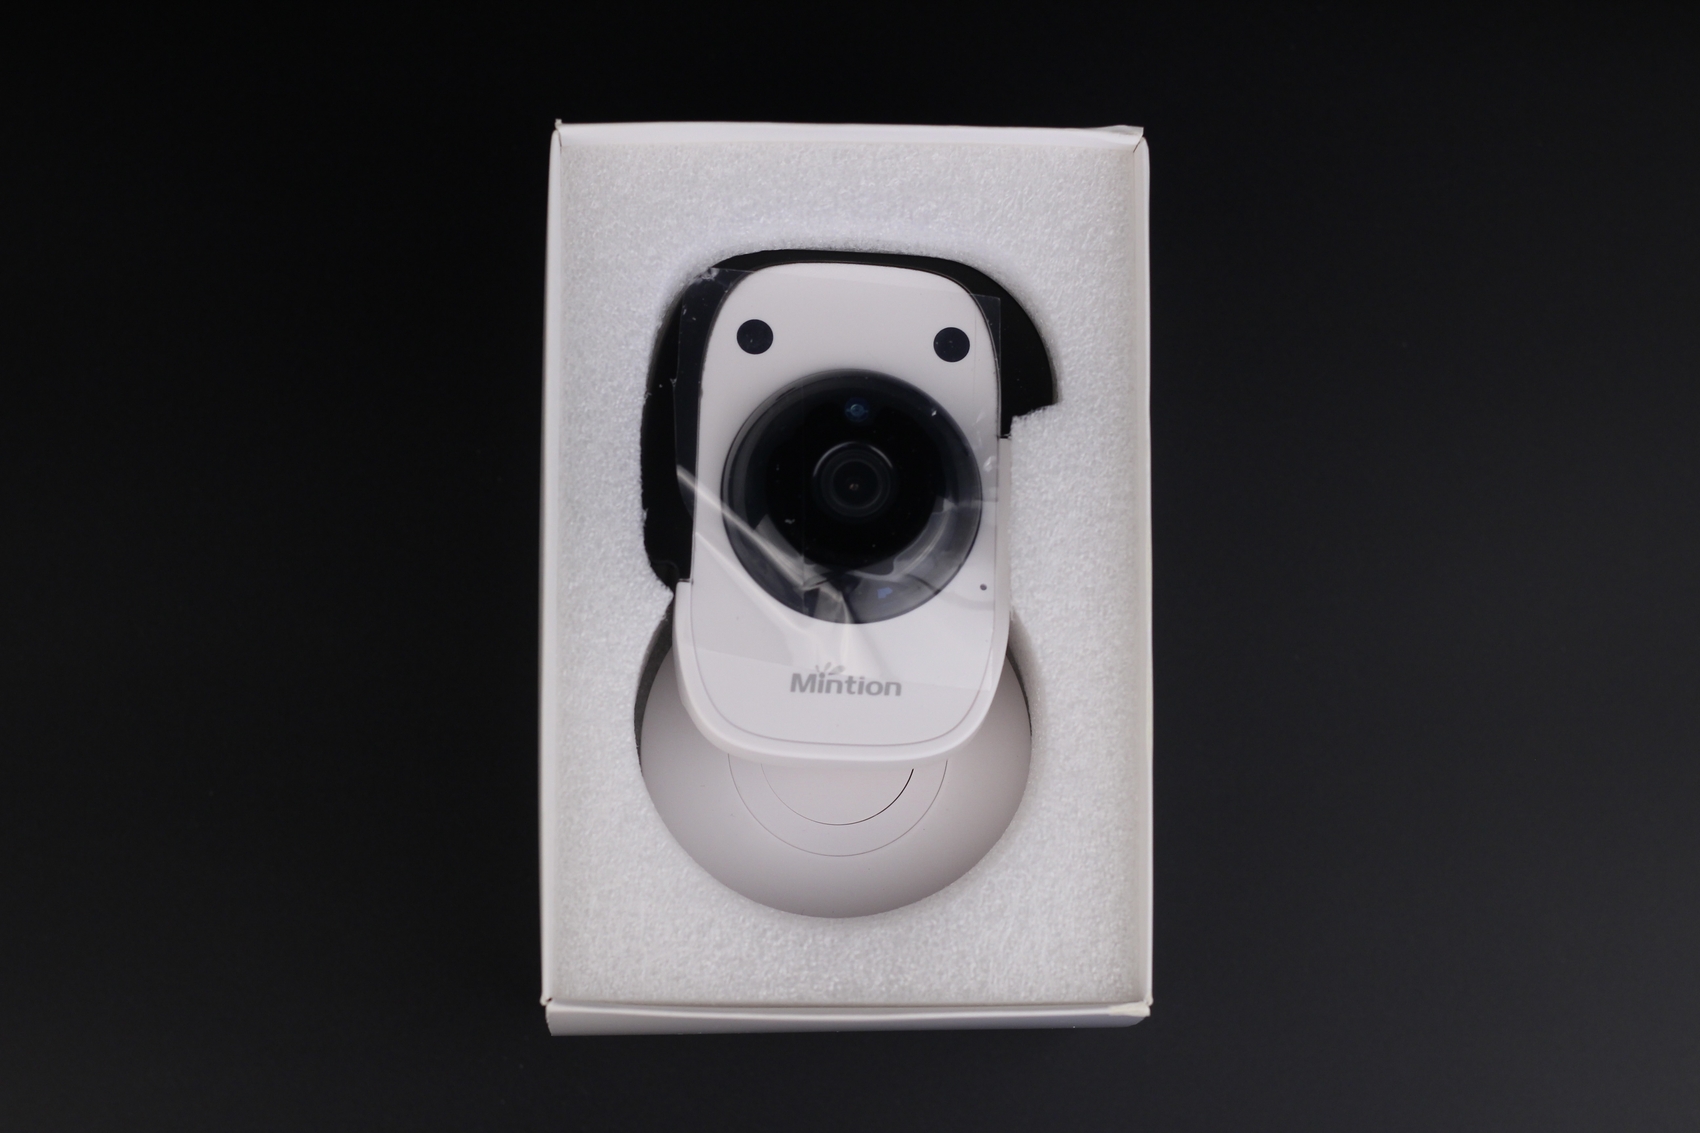 Mintion Beagle Camera Review Packaging5 | Mintion Beagle Camera Review: OctoPrint Alternative